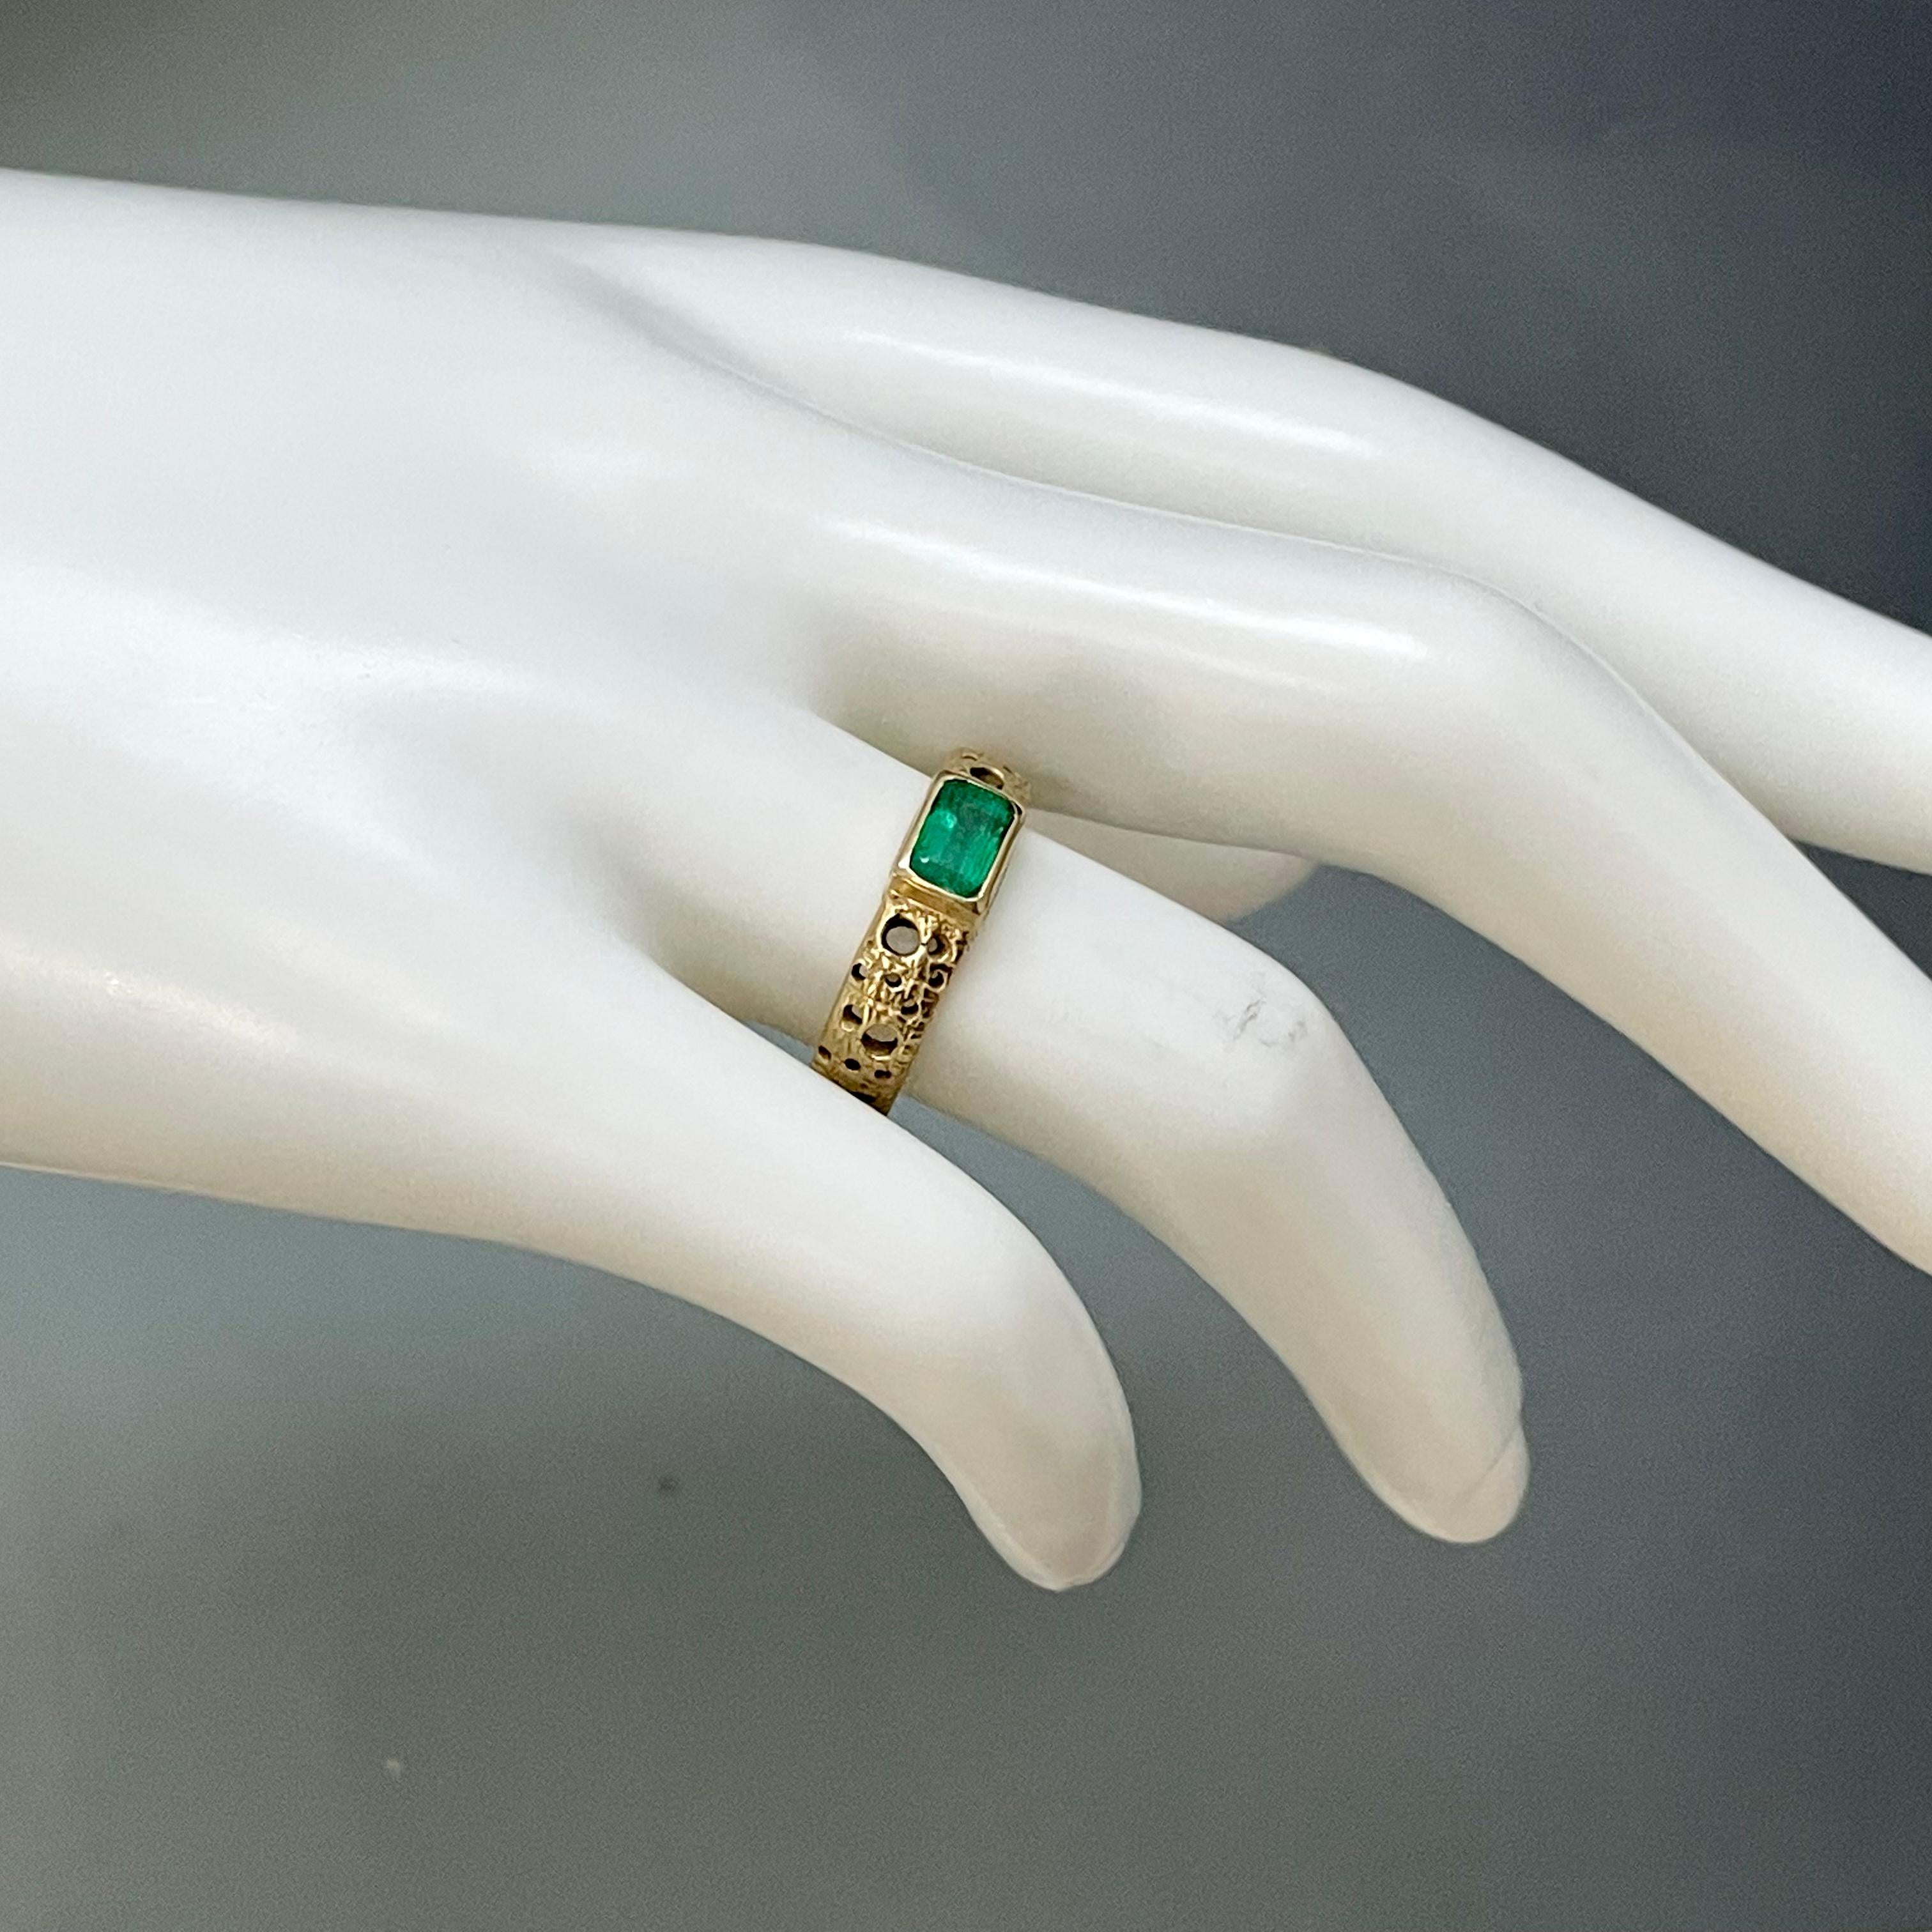 A clear and lively 4 x 6 mm octagon cut emerald is set into an organically carved and textured 18K shank in this unique design.  This ring is currently sized 7.5.  It would be difficult to size up.  Sizing down could be possible.